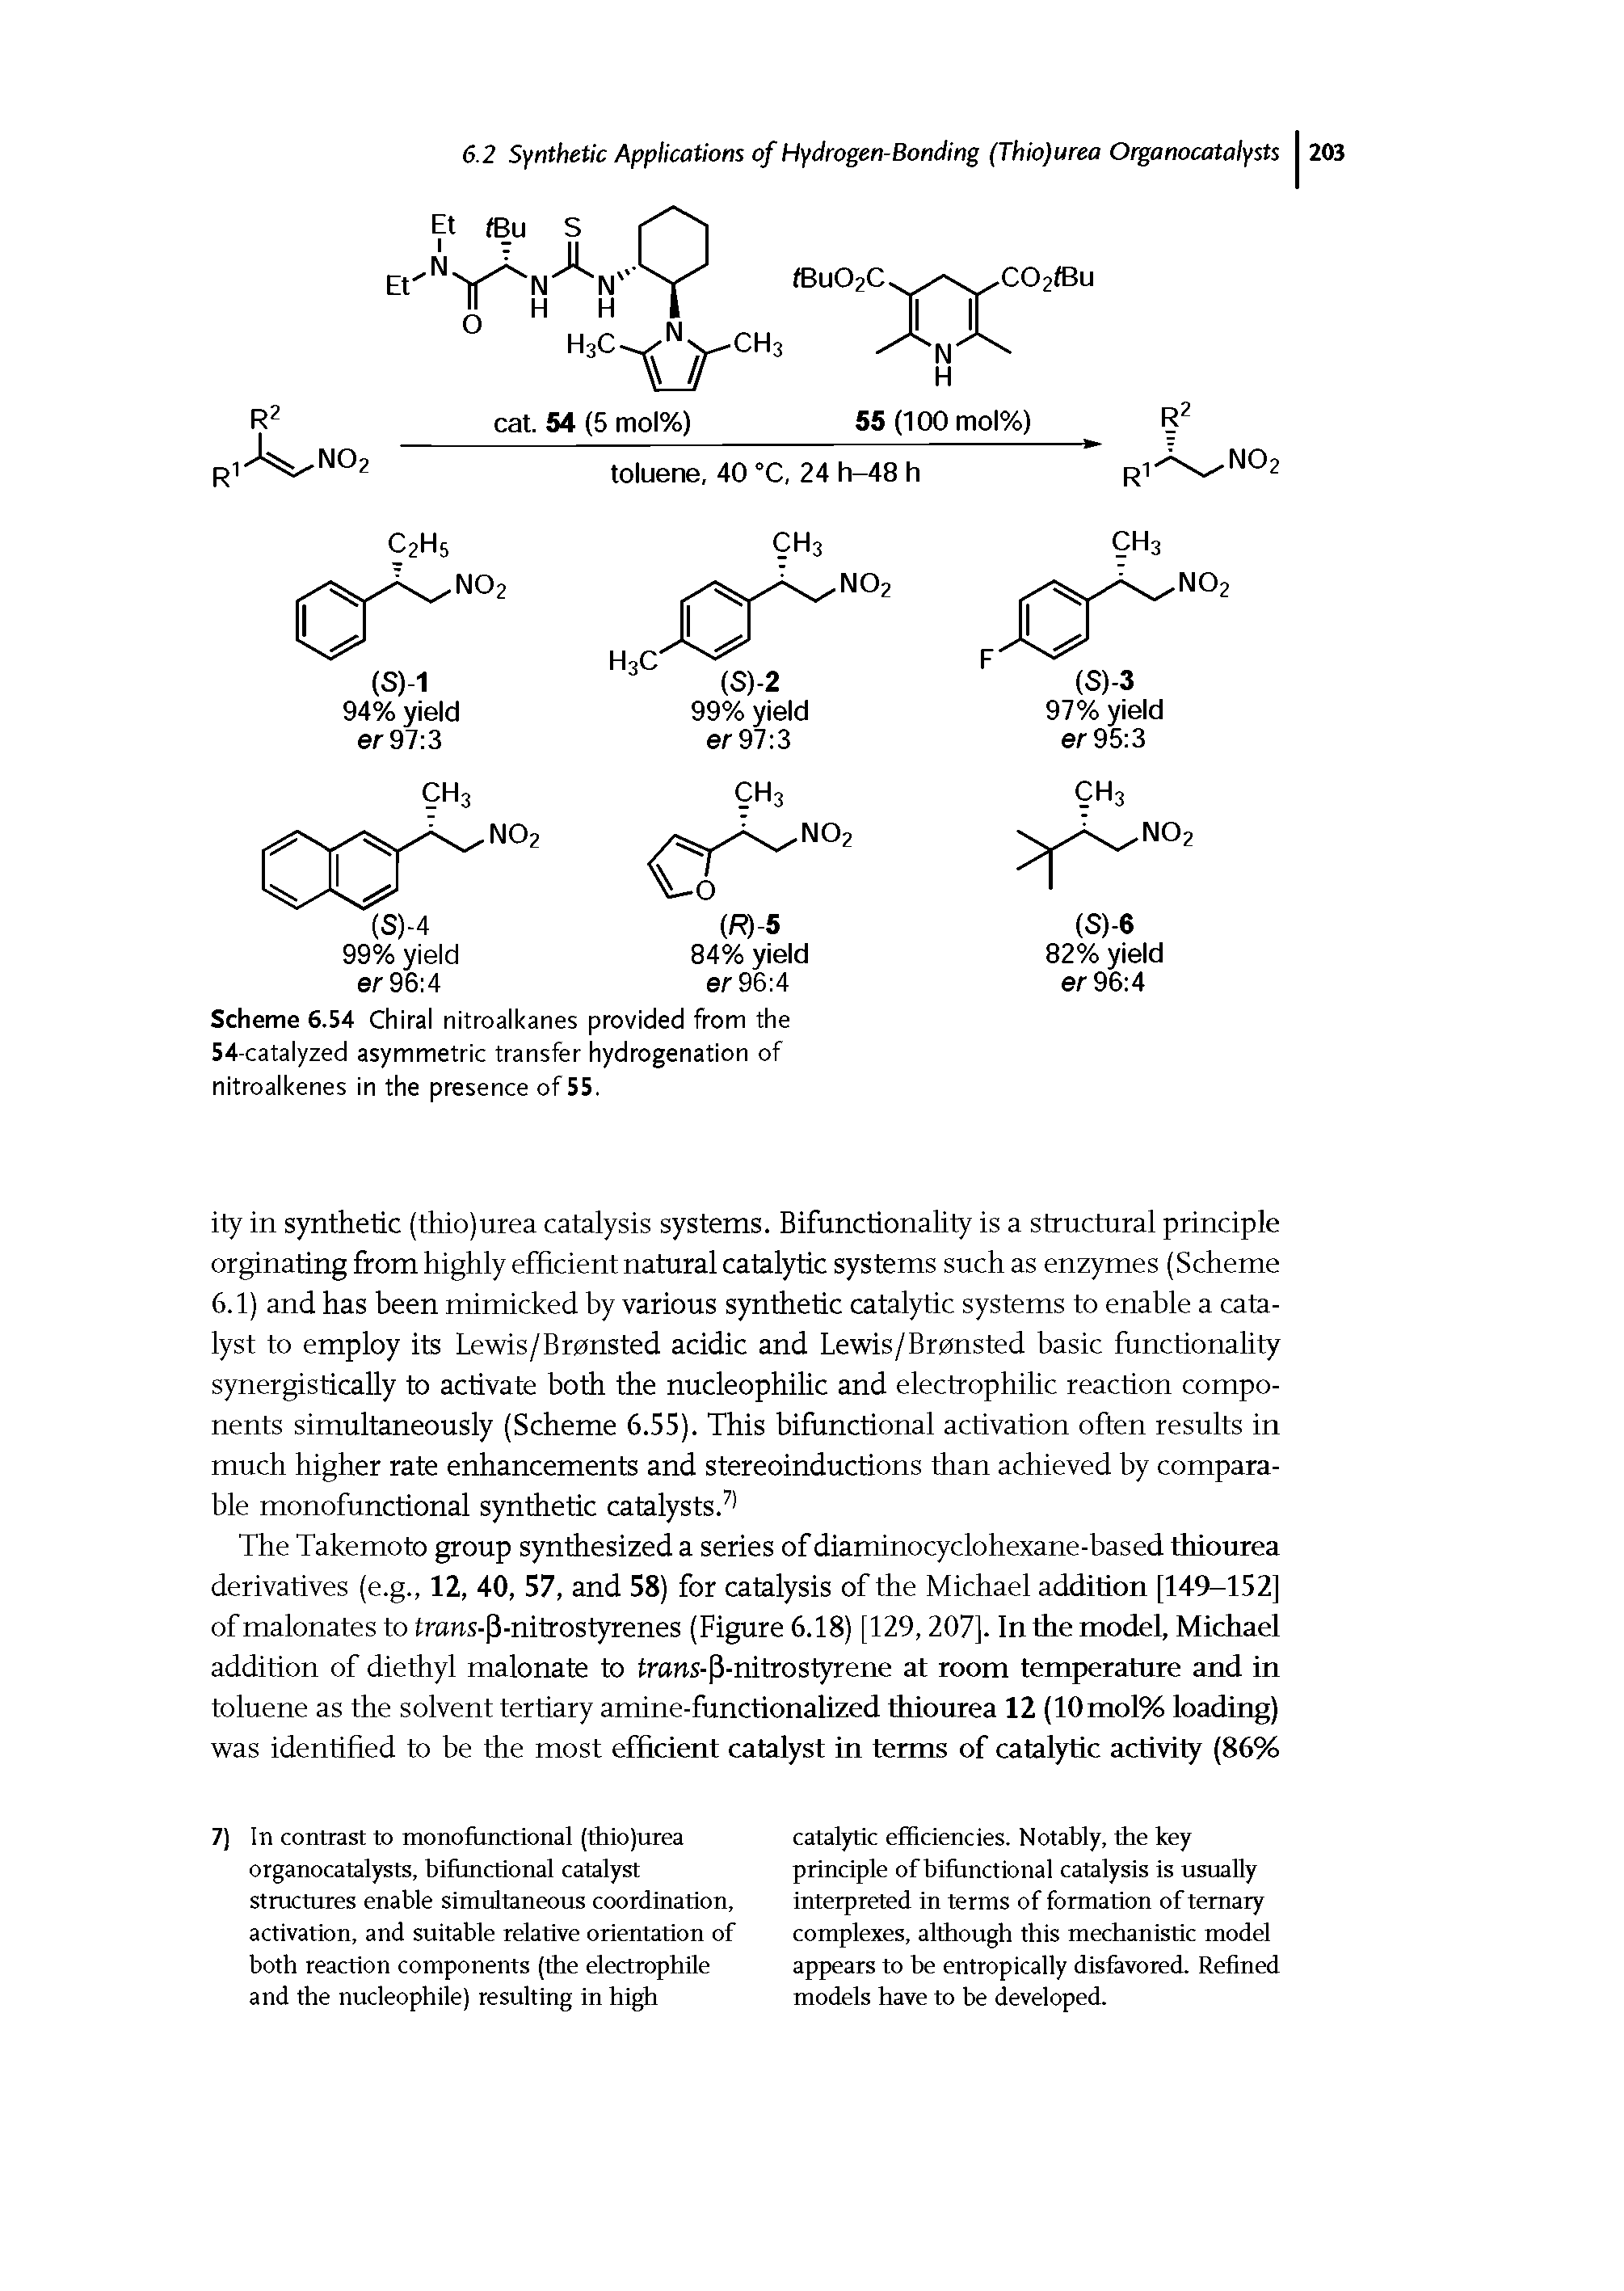 Scheme 6.54 Chiral nitroalkanes provided from the 54-catalyzed asymmetric transfer hydrogenation of nitroalkenes in the presence of 55.